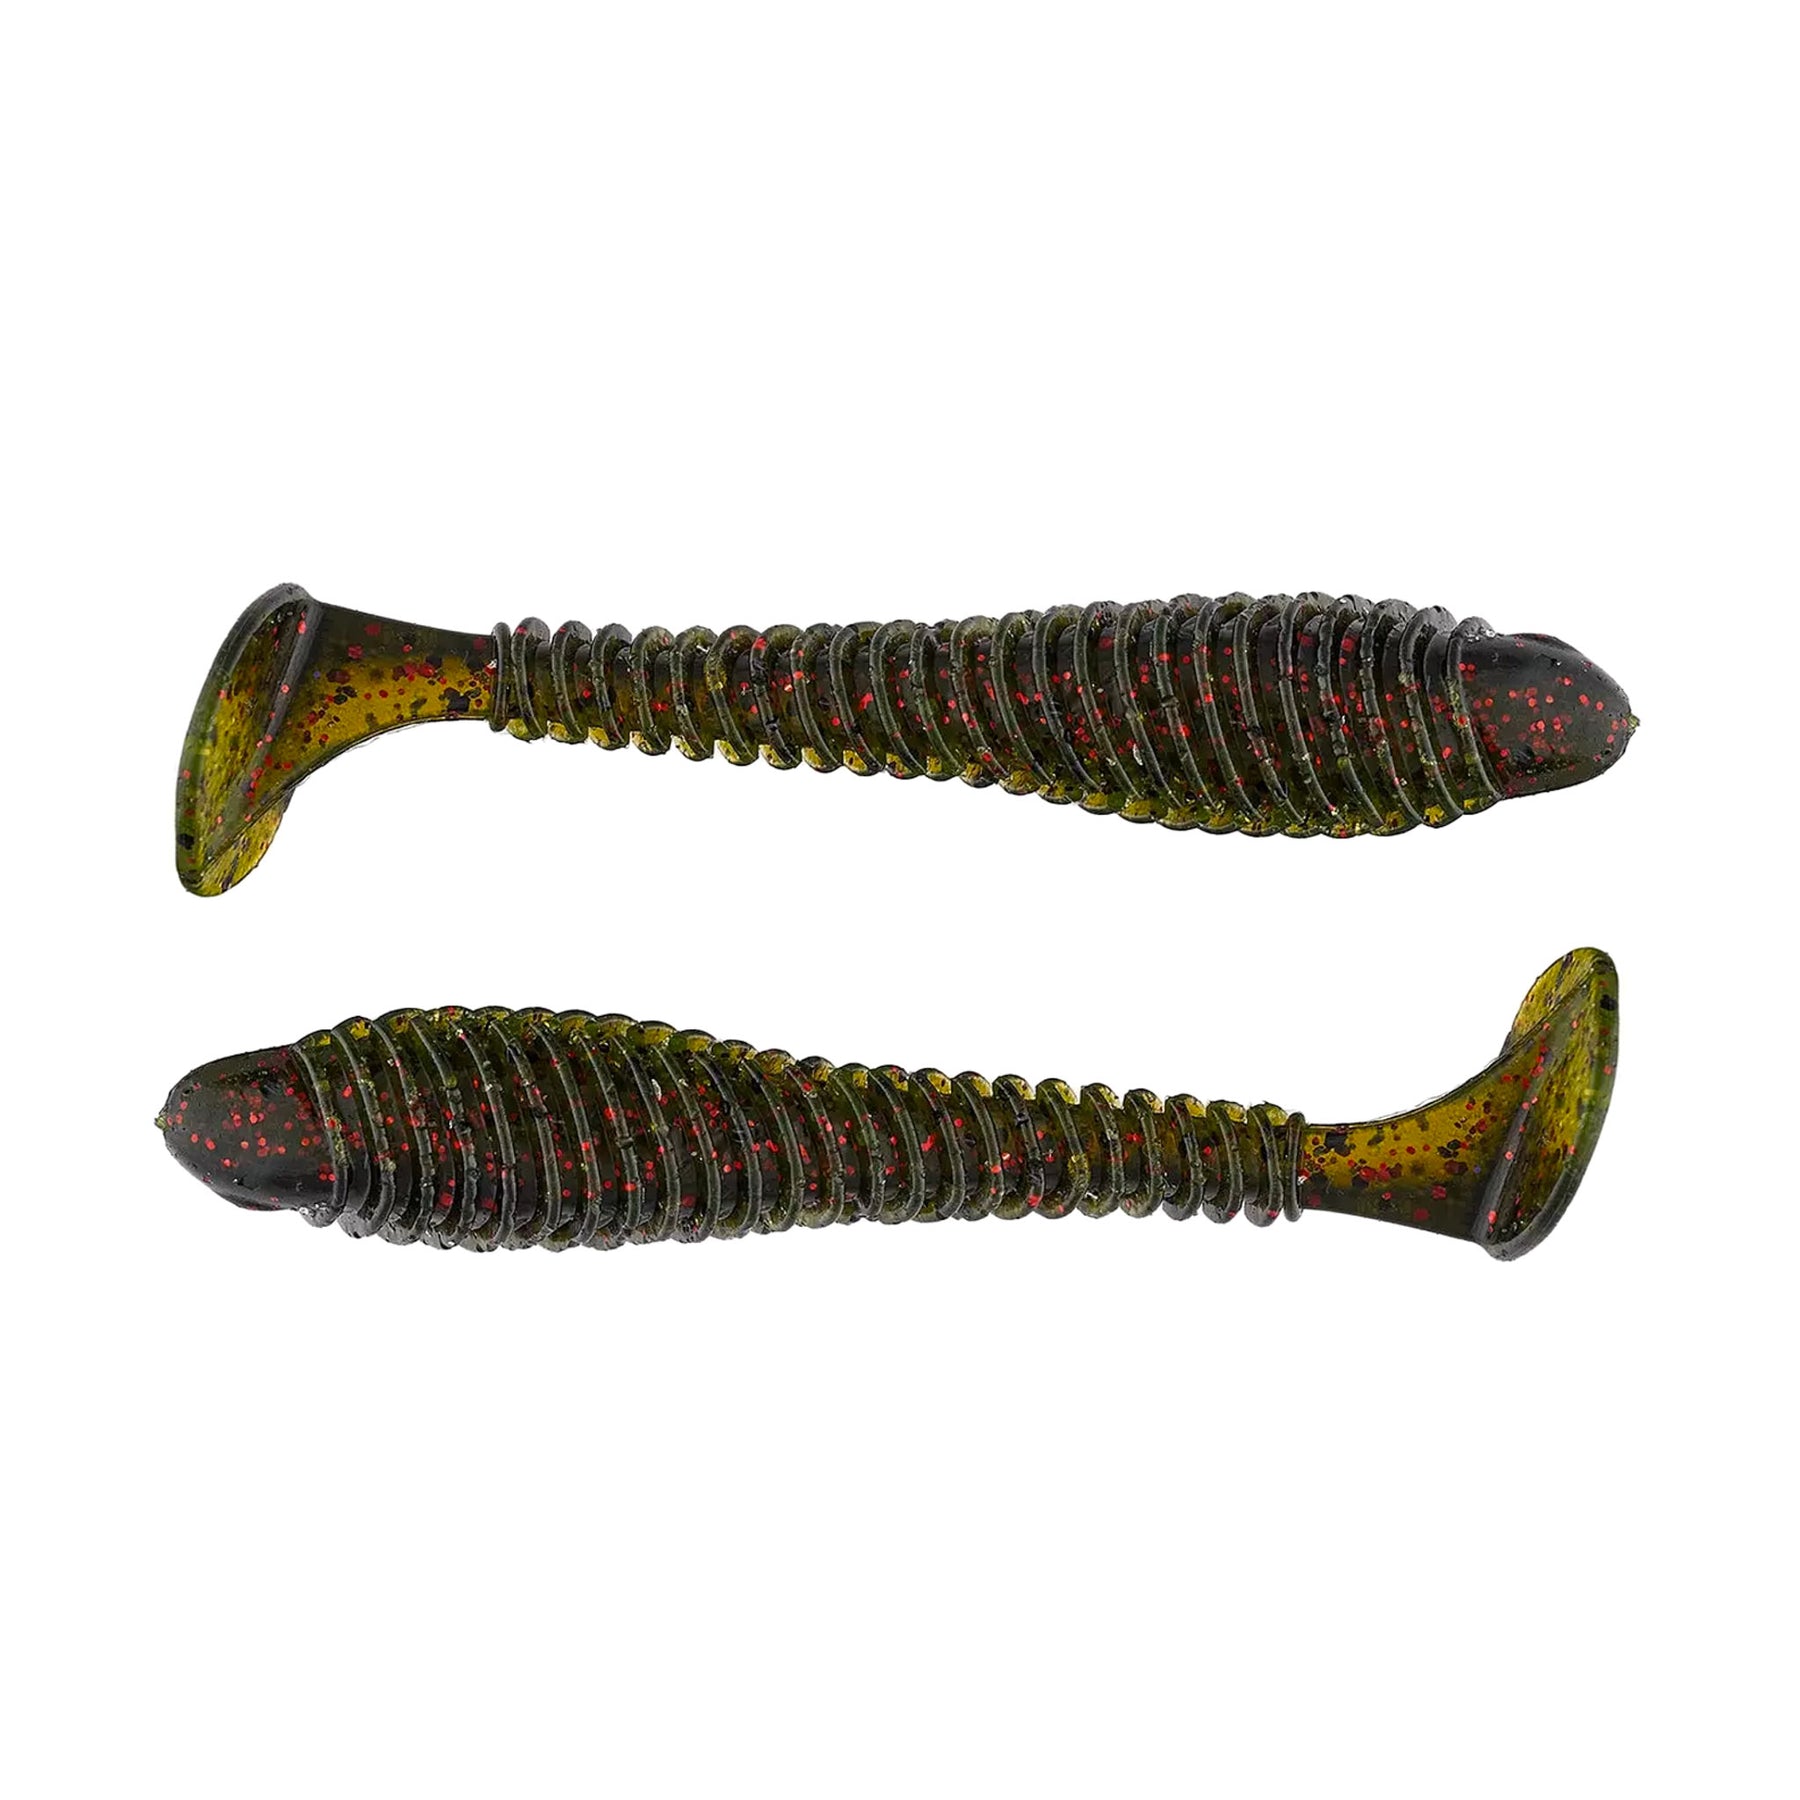 Googan Baits 2.5 Snacky Swimmer GCSS-25-PBR Pro Blue Red Count 30 